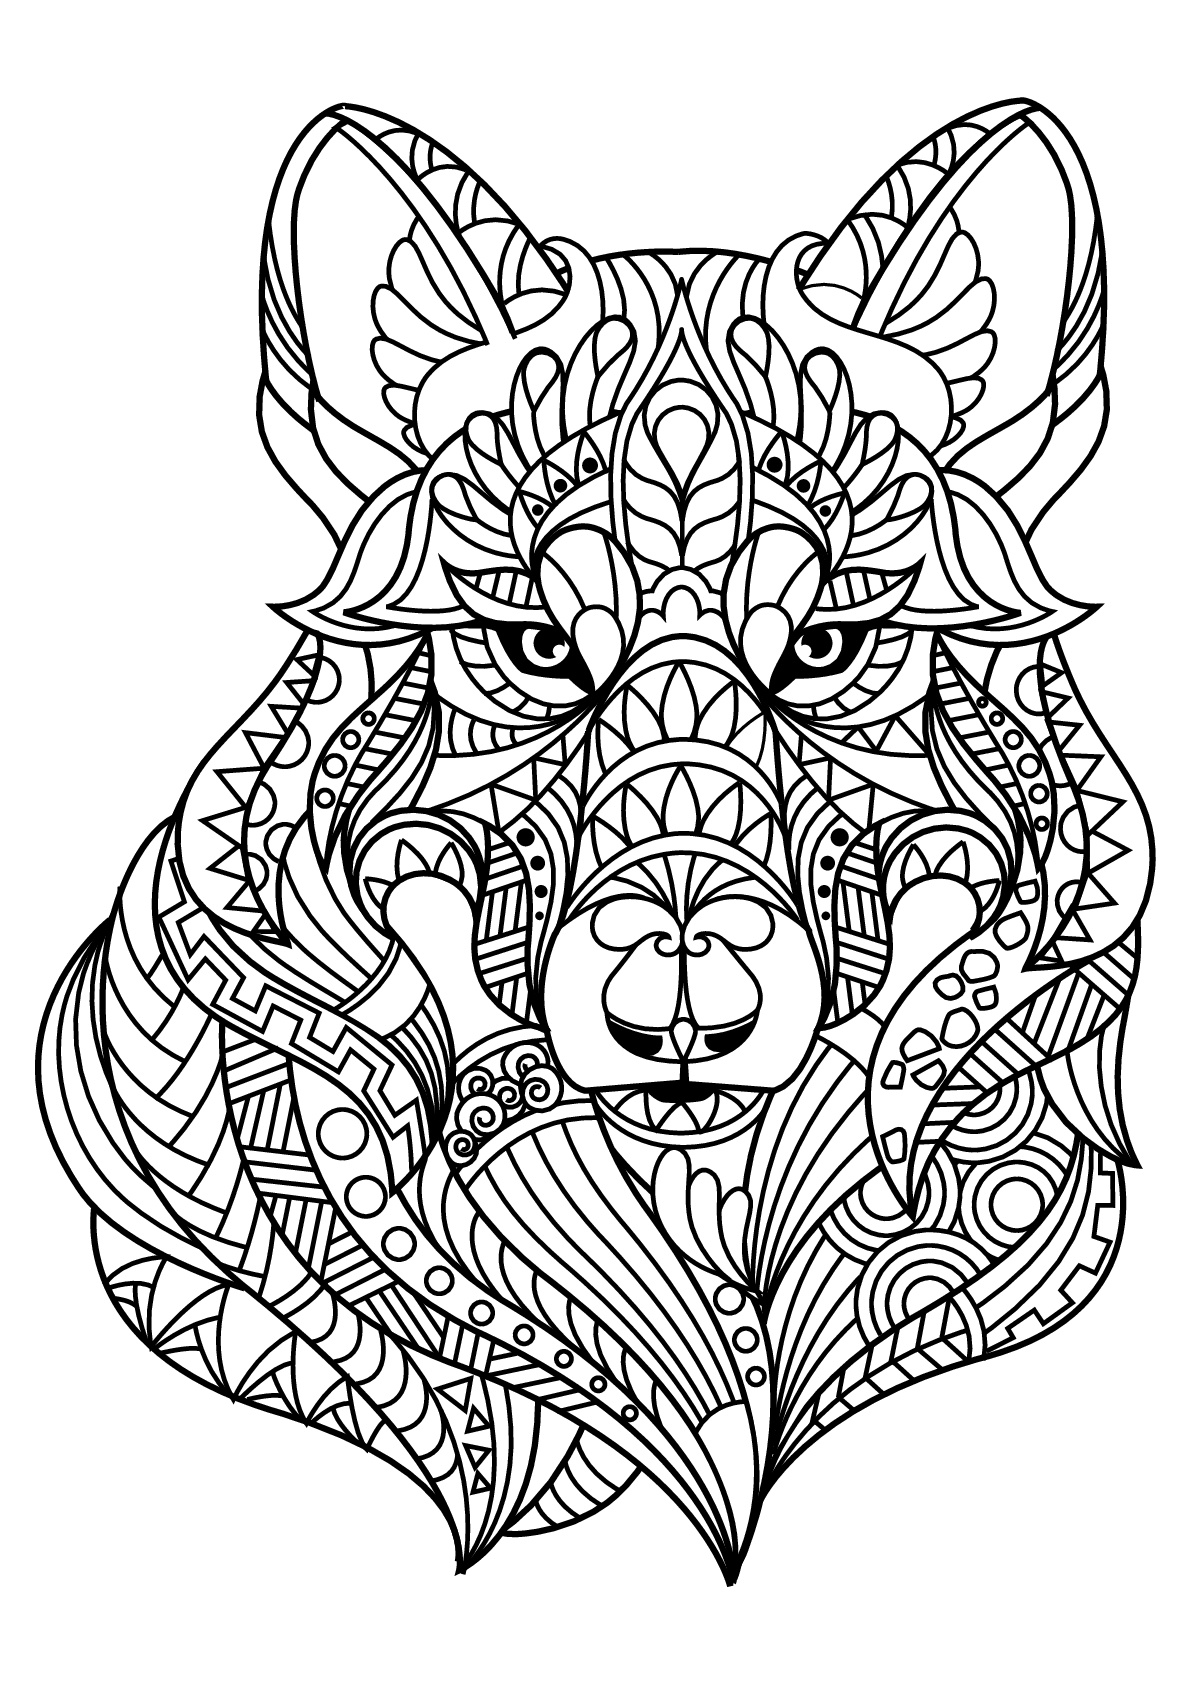 Free book wolf - Wolves Adult Coloring Pages